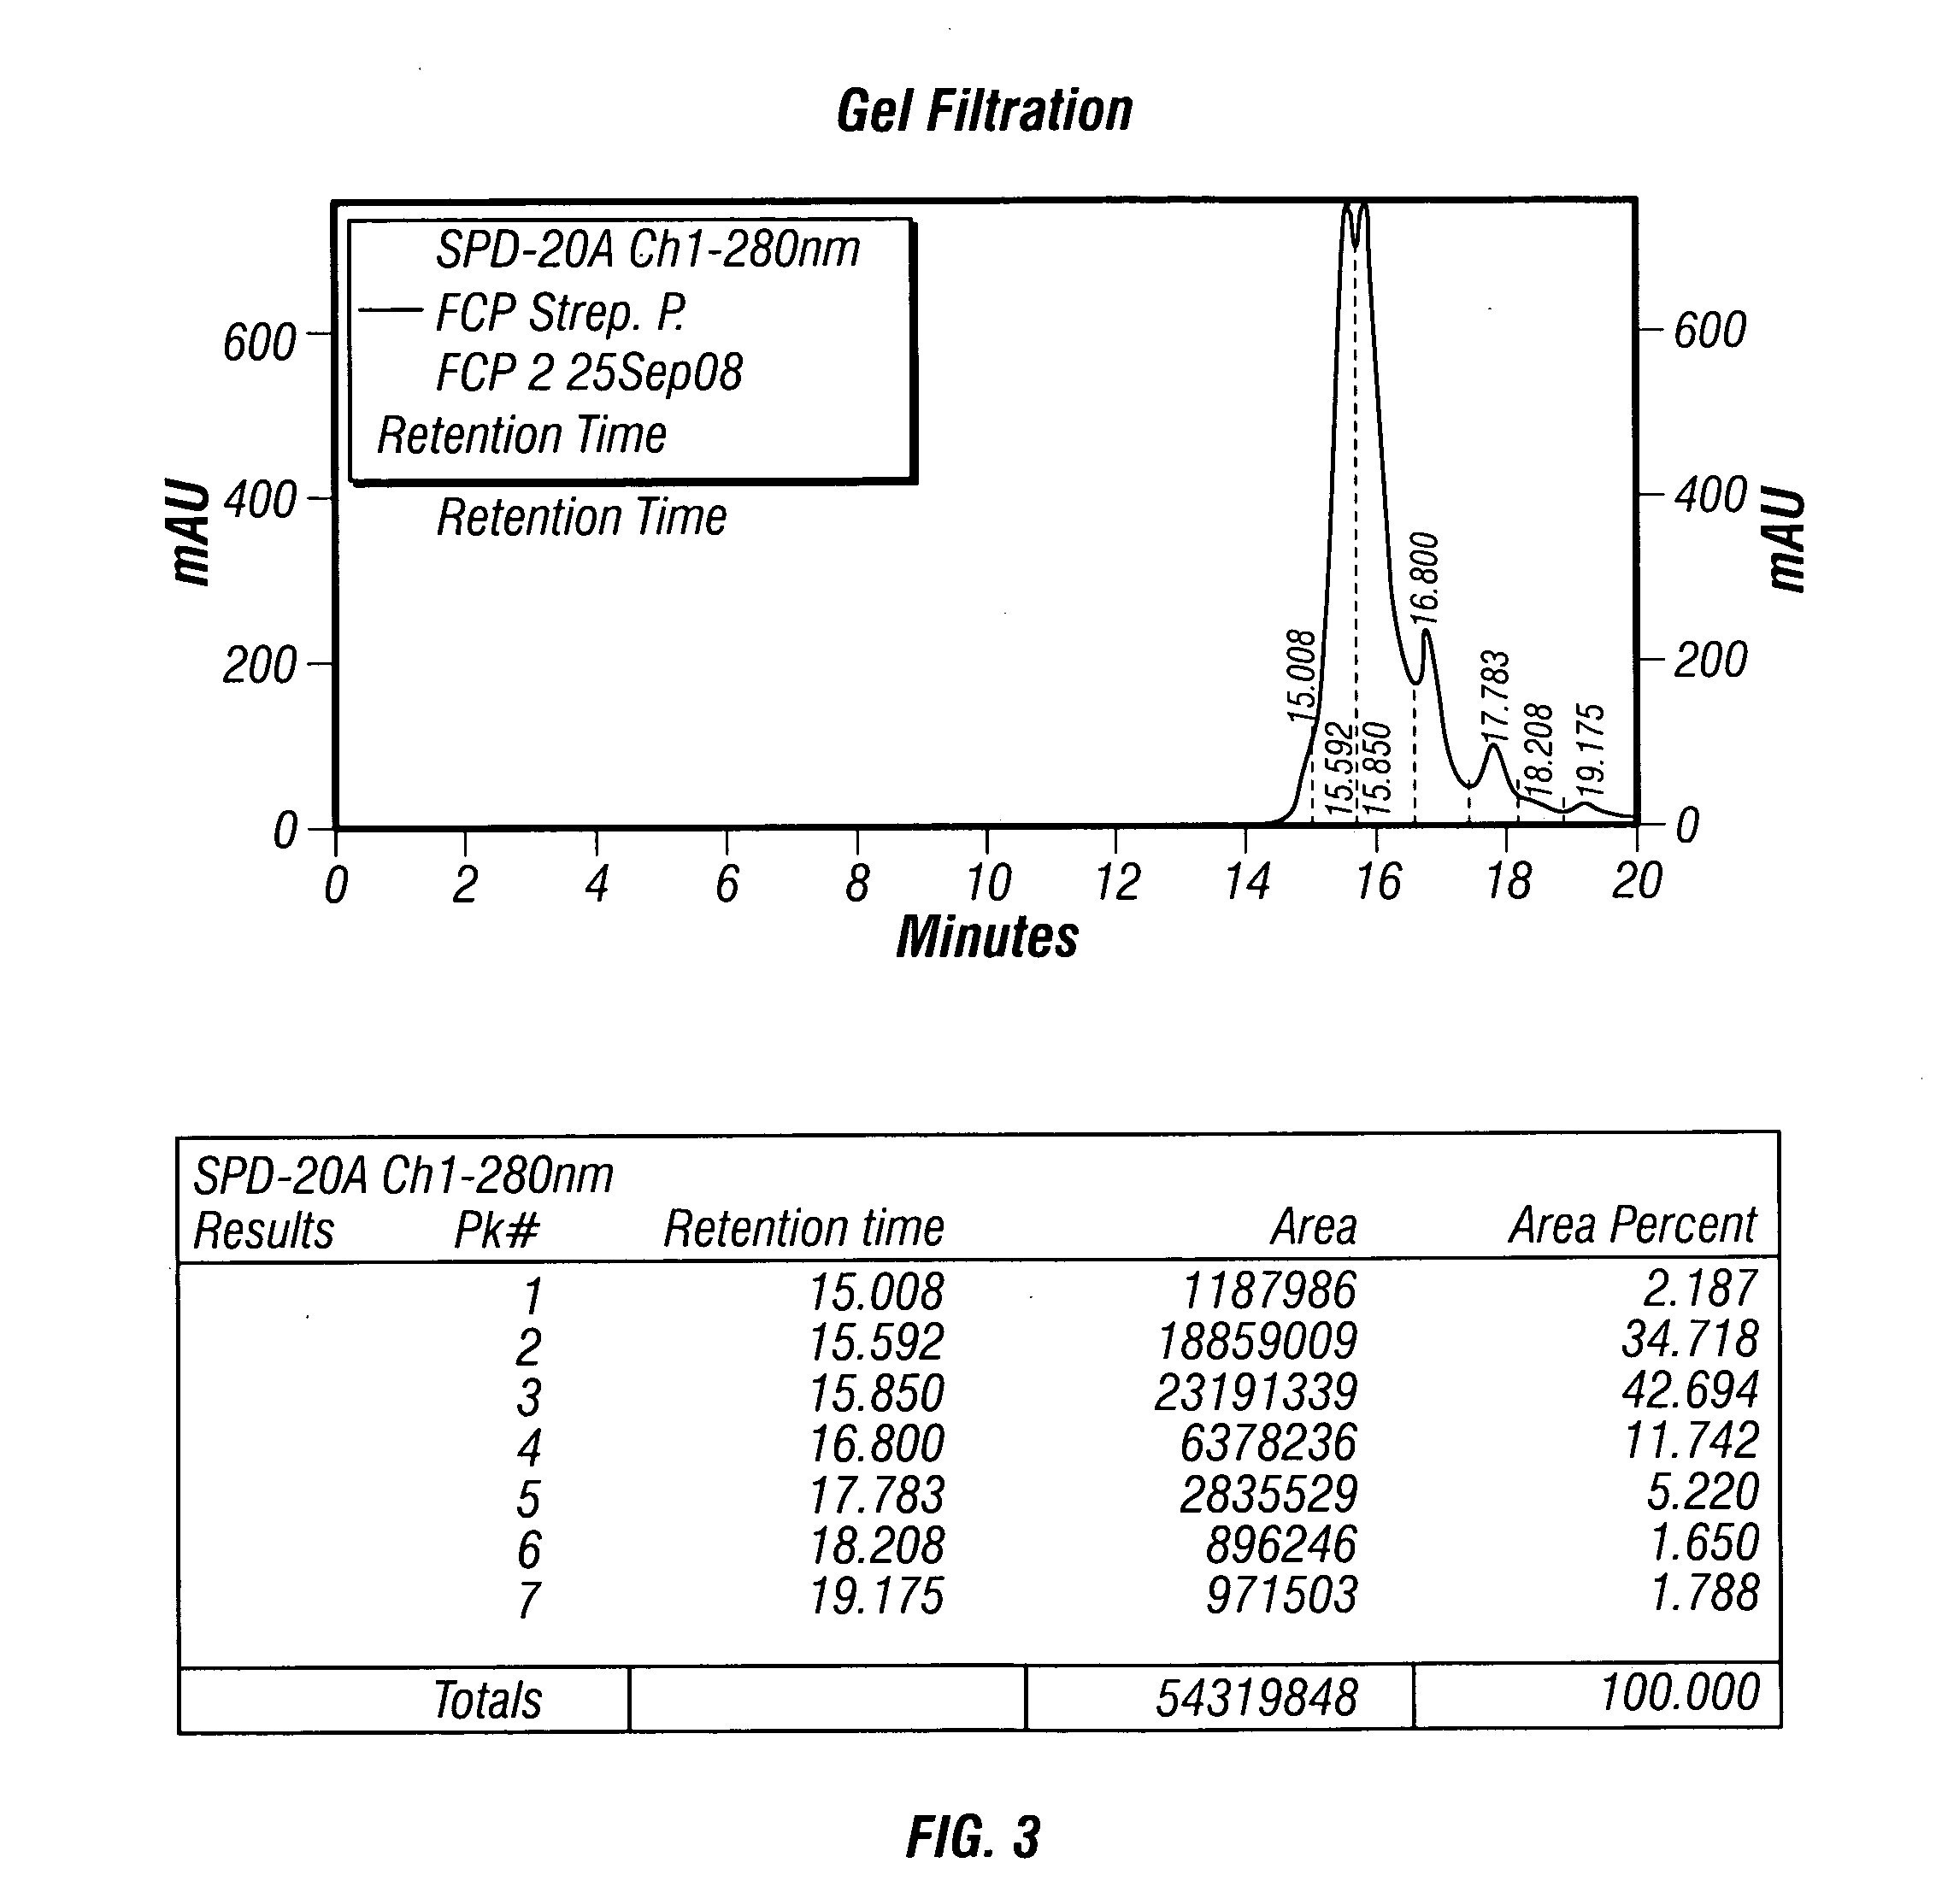 Affinity purified human polyclonal antibodies and methods of making and using them